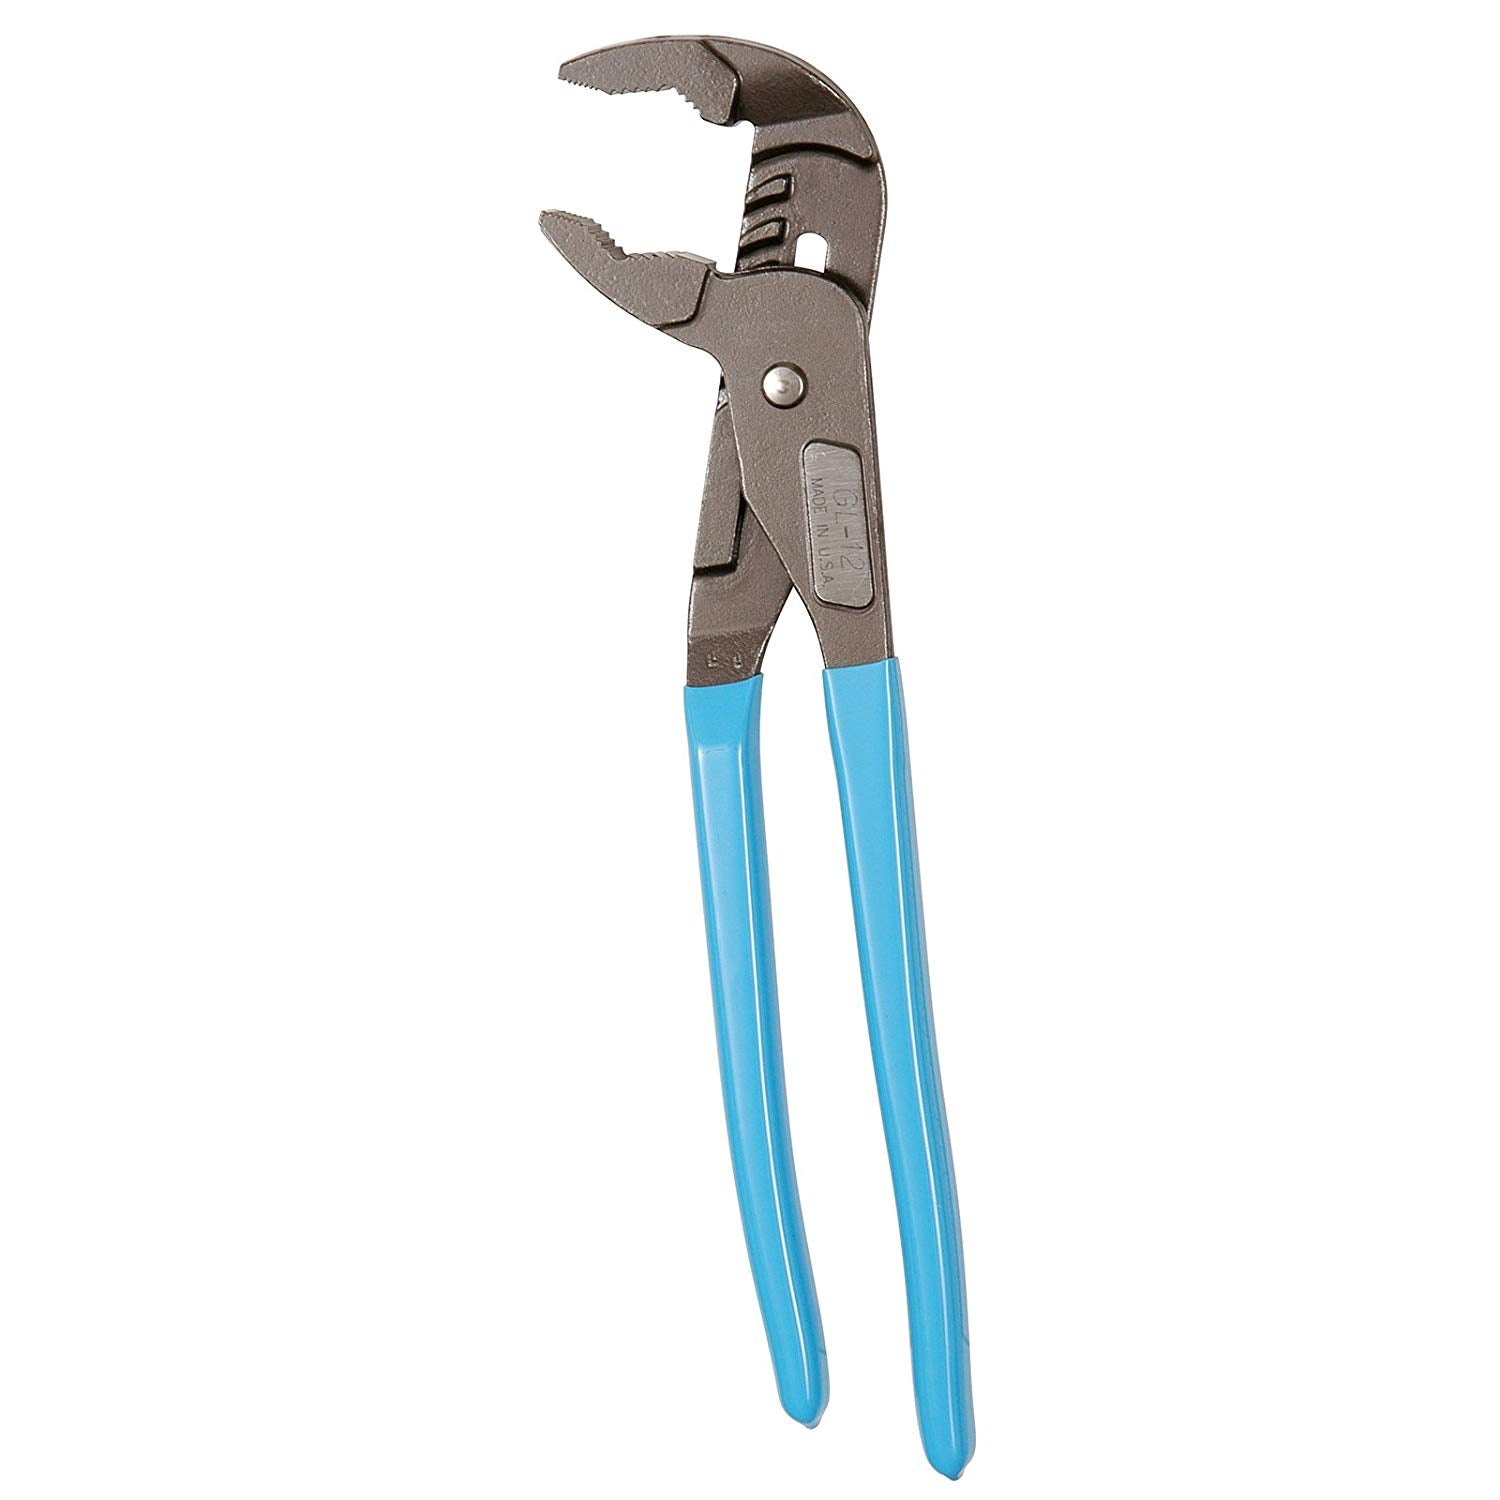 ChannelLock GL12 - 12" GripLock Tongue & Groove Plier - wise-line-tools